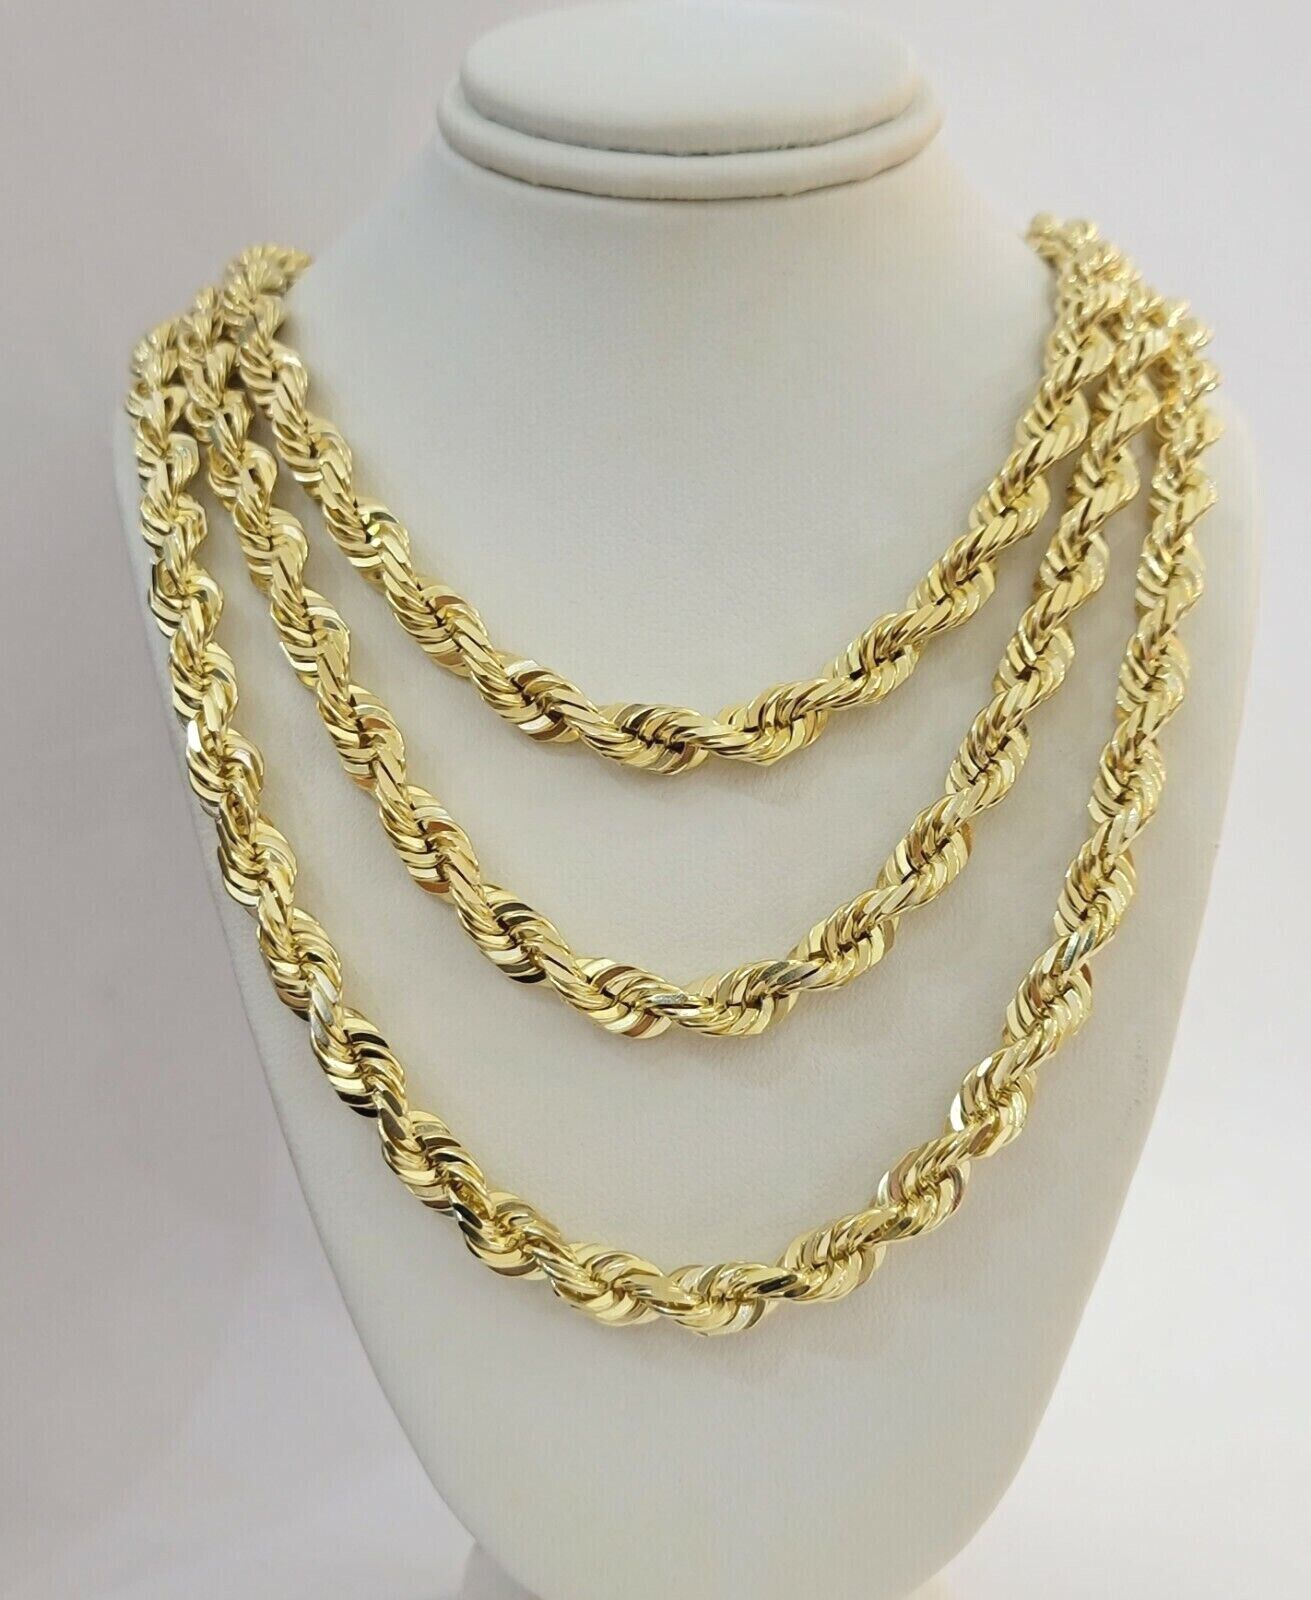 Real 10k Gold Solid Rope Chain Mens Necklace 8mm 24" Inch Diamond cuts 10kt